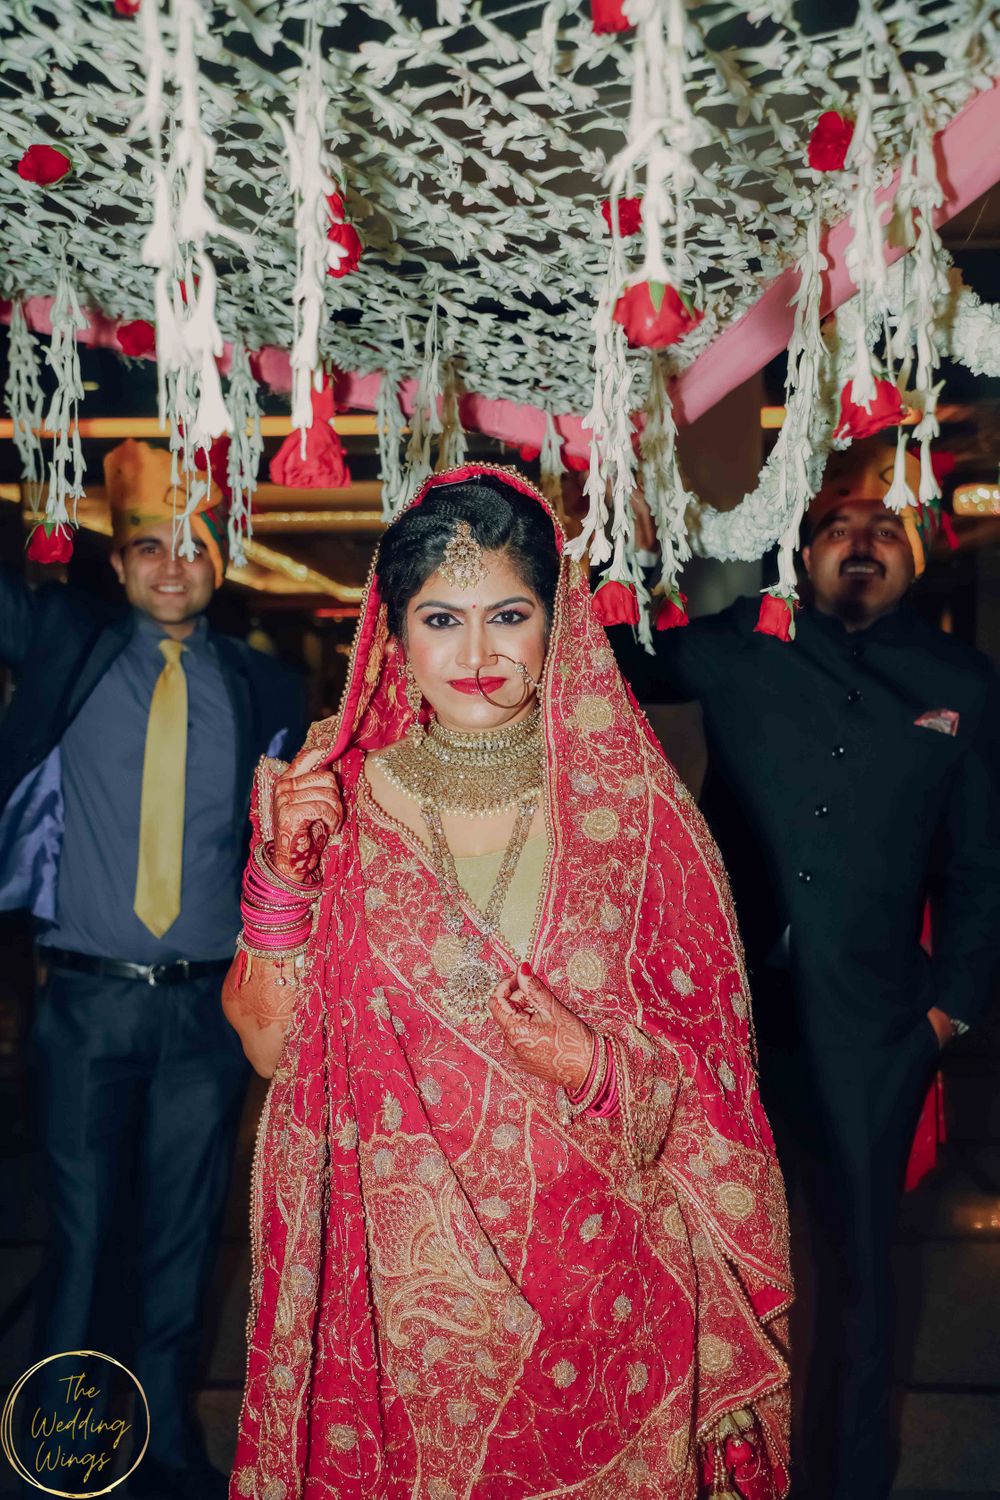 Photo From Aditi Sukhmeet - By The Wedding Wings